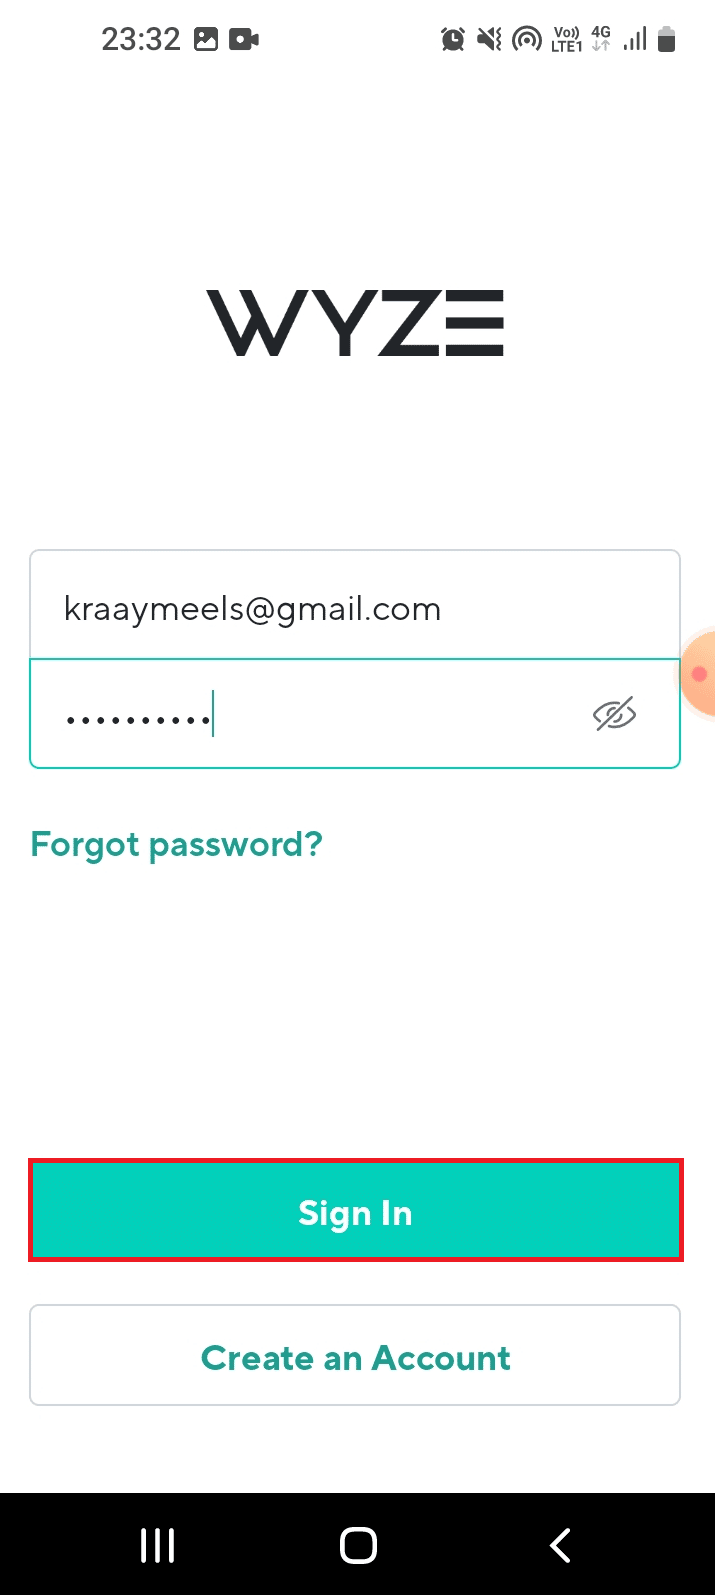 Enter the user account credentials in the fields and tap on the Sign In button. Fix Wyze Error Code 06